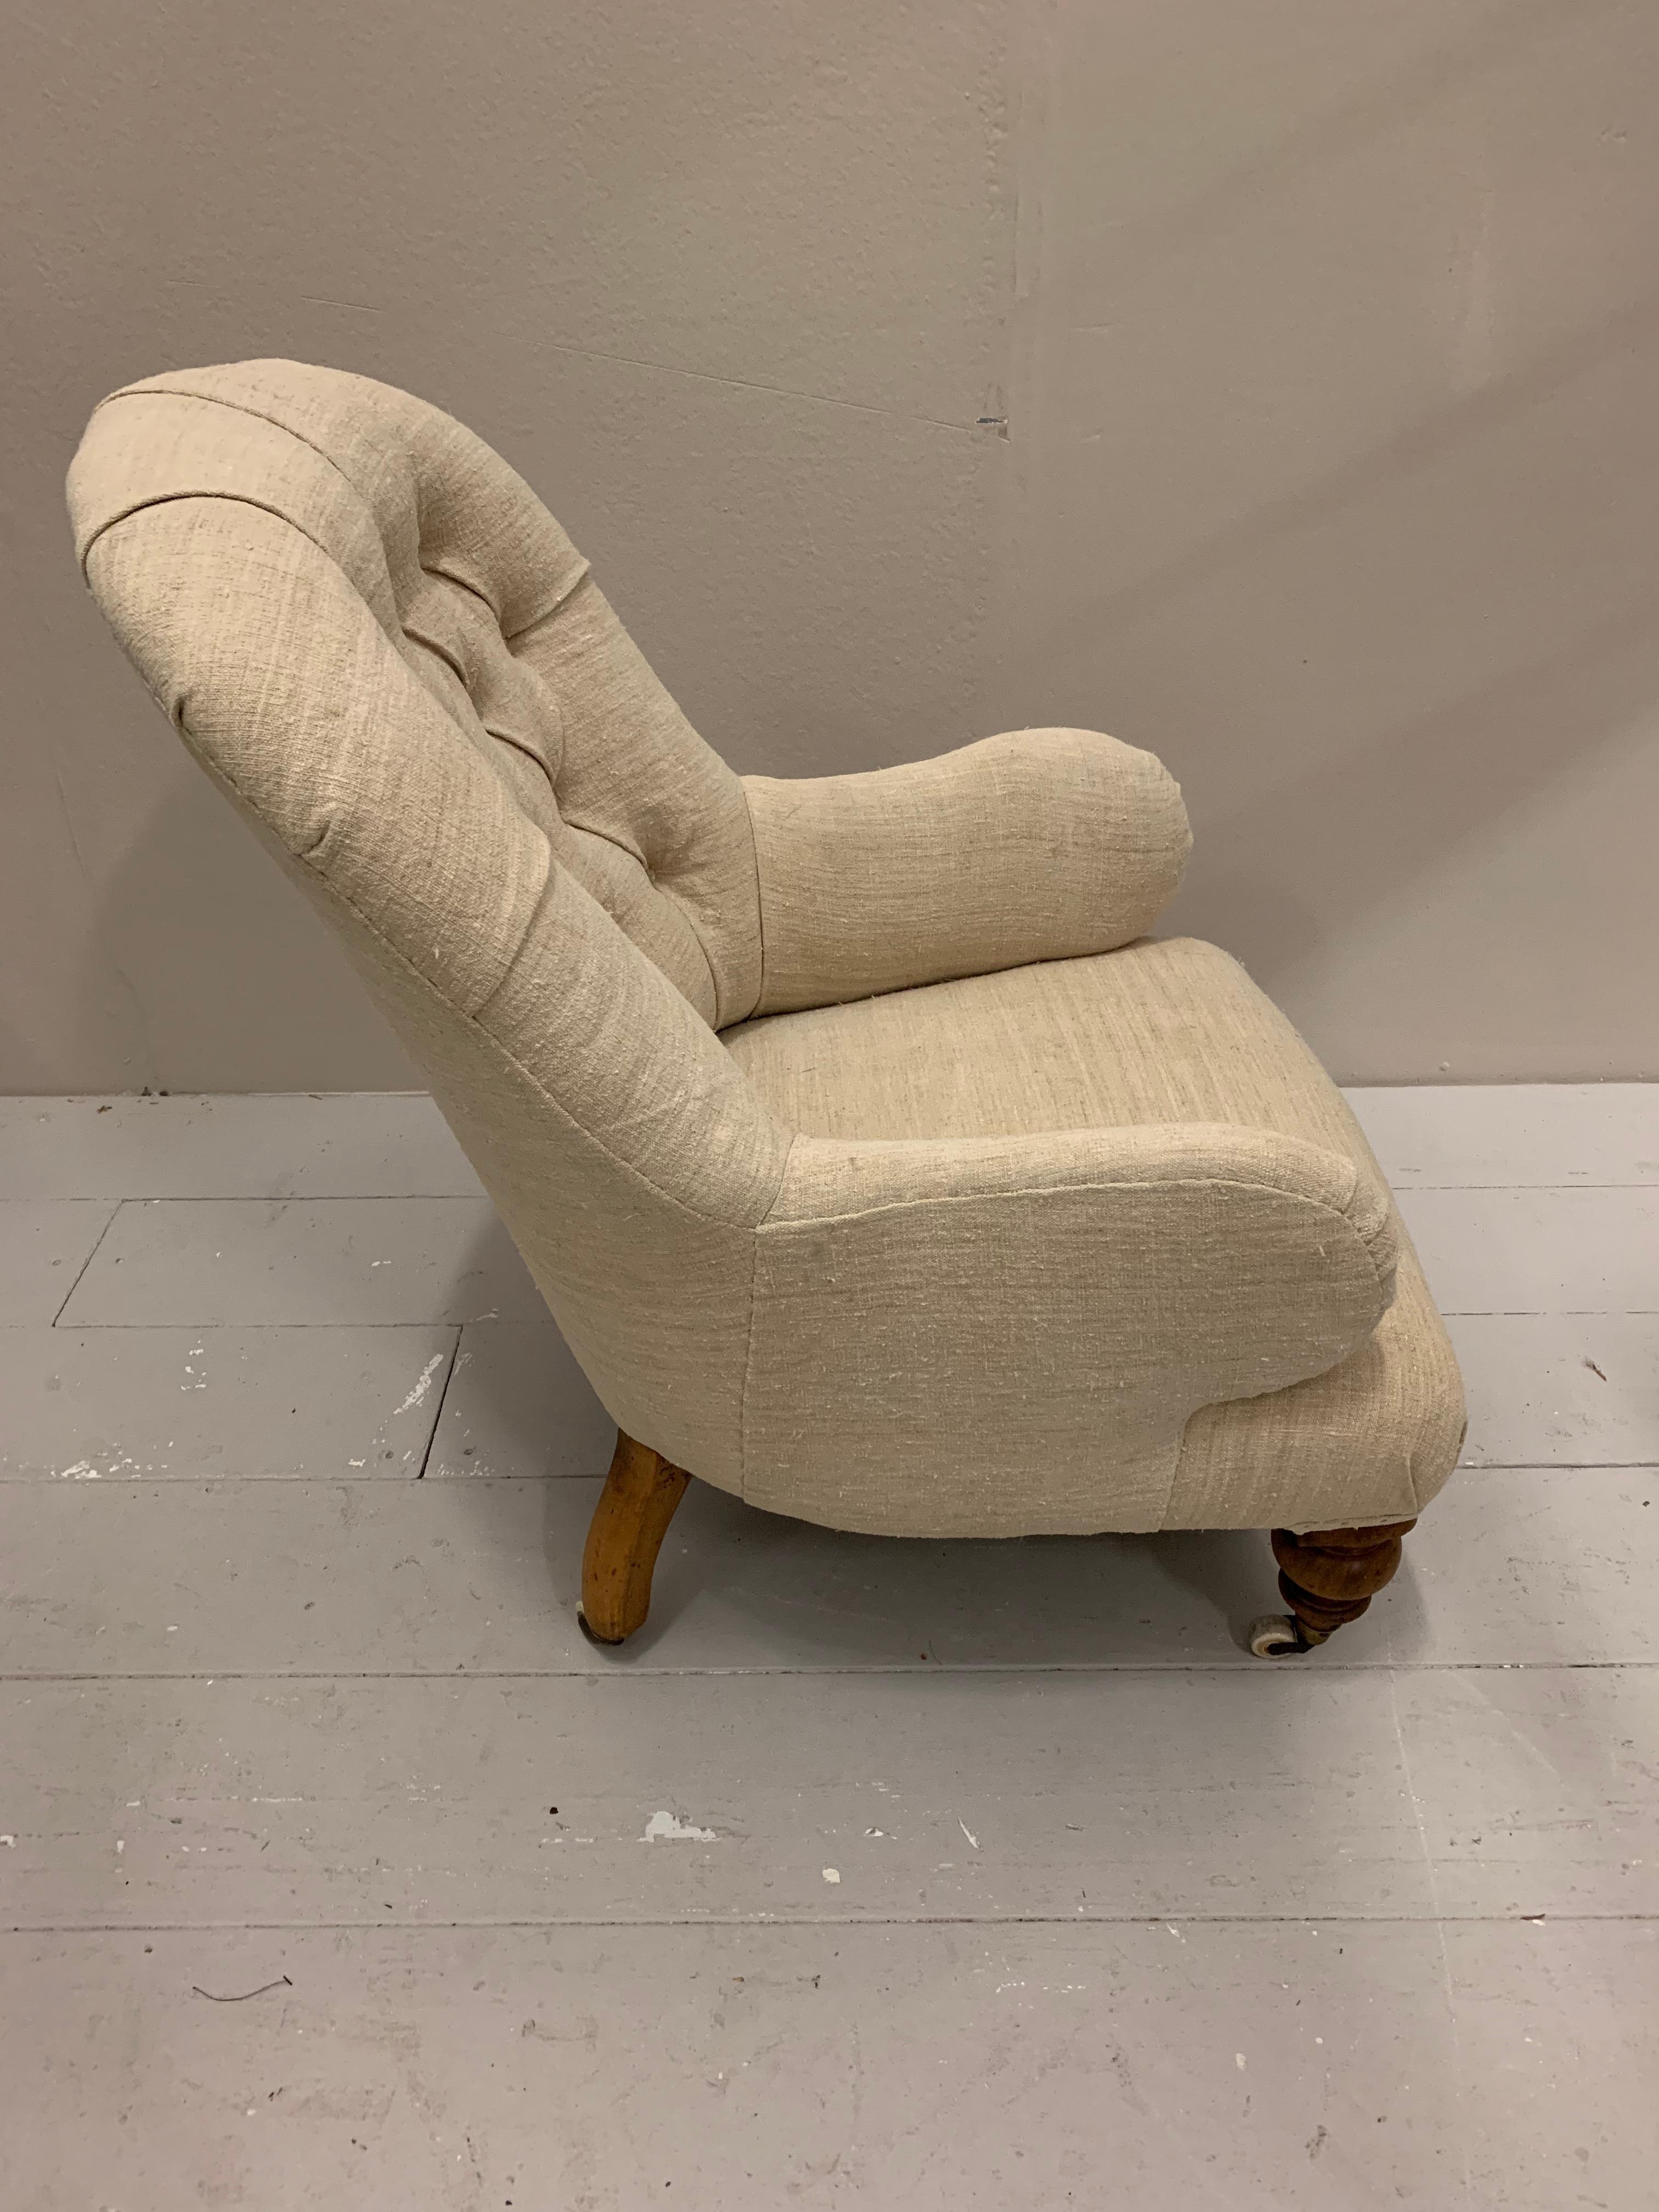 Ceramic Circa 19th Century English Upholstered Buttoned Back Armchair in French Linen For Sale